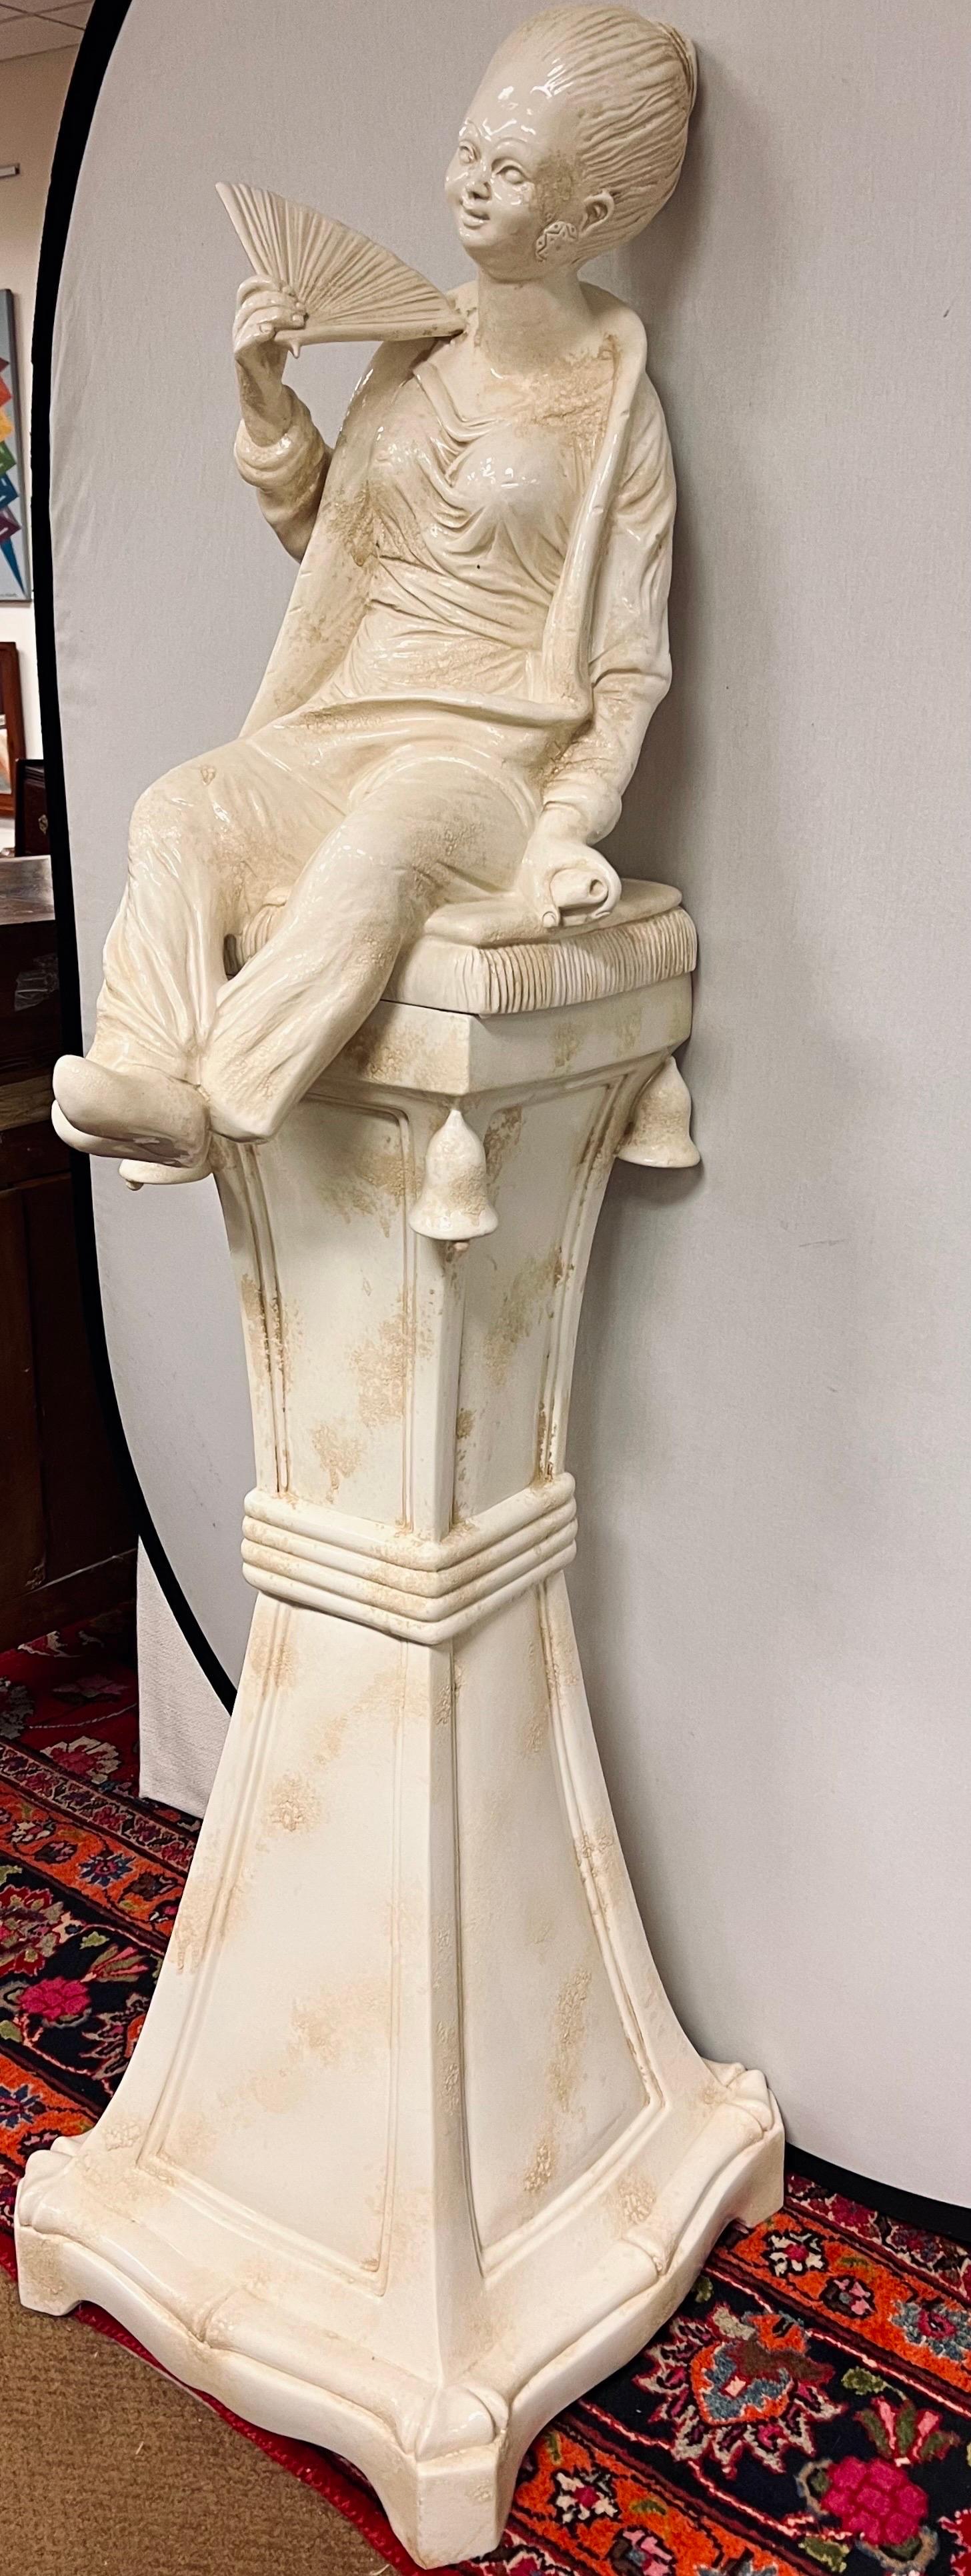 20th Century Chelsea House Made in Italy Porcelain Chinoiserie Sculpture Statue of Woman  For Sale